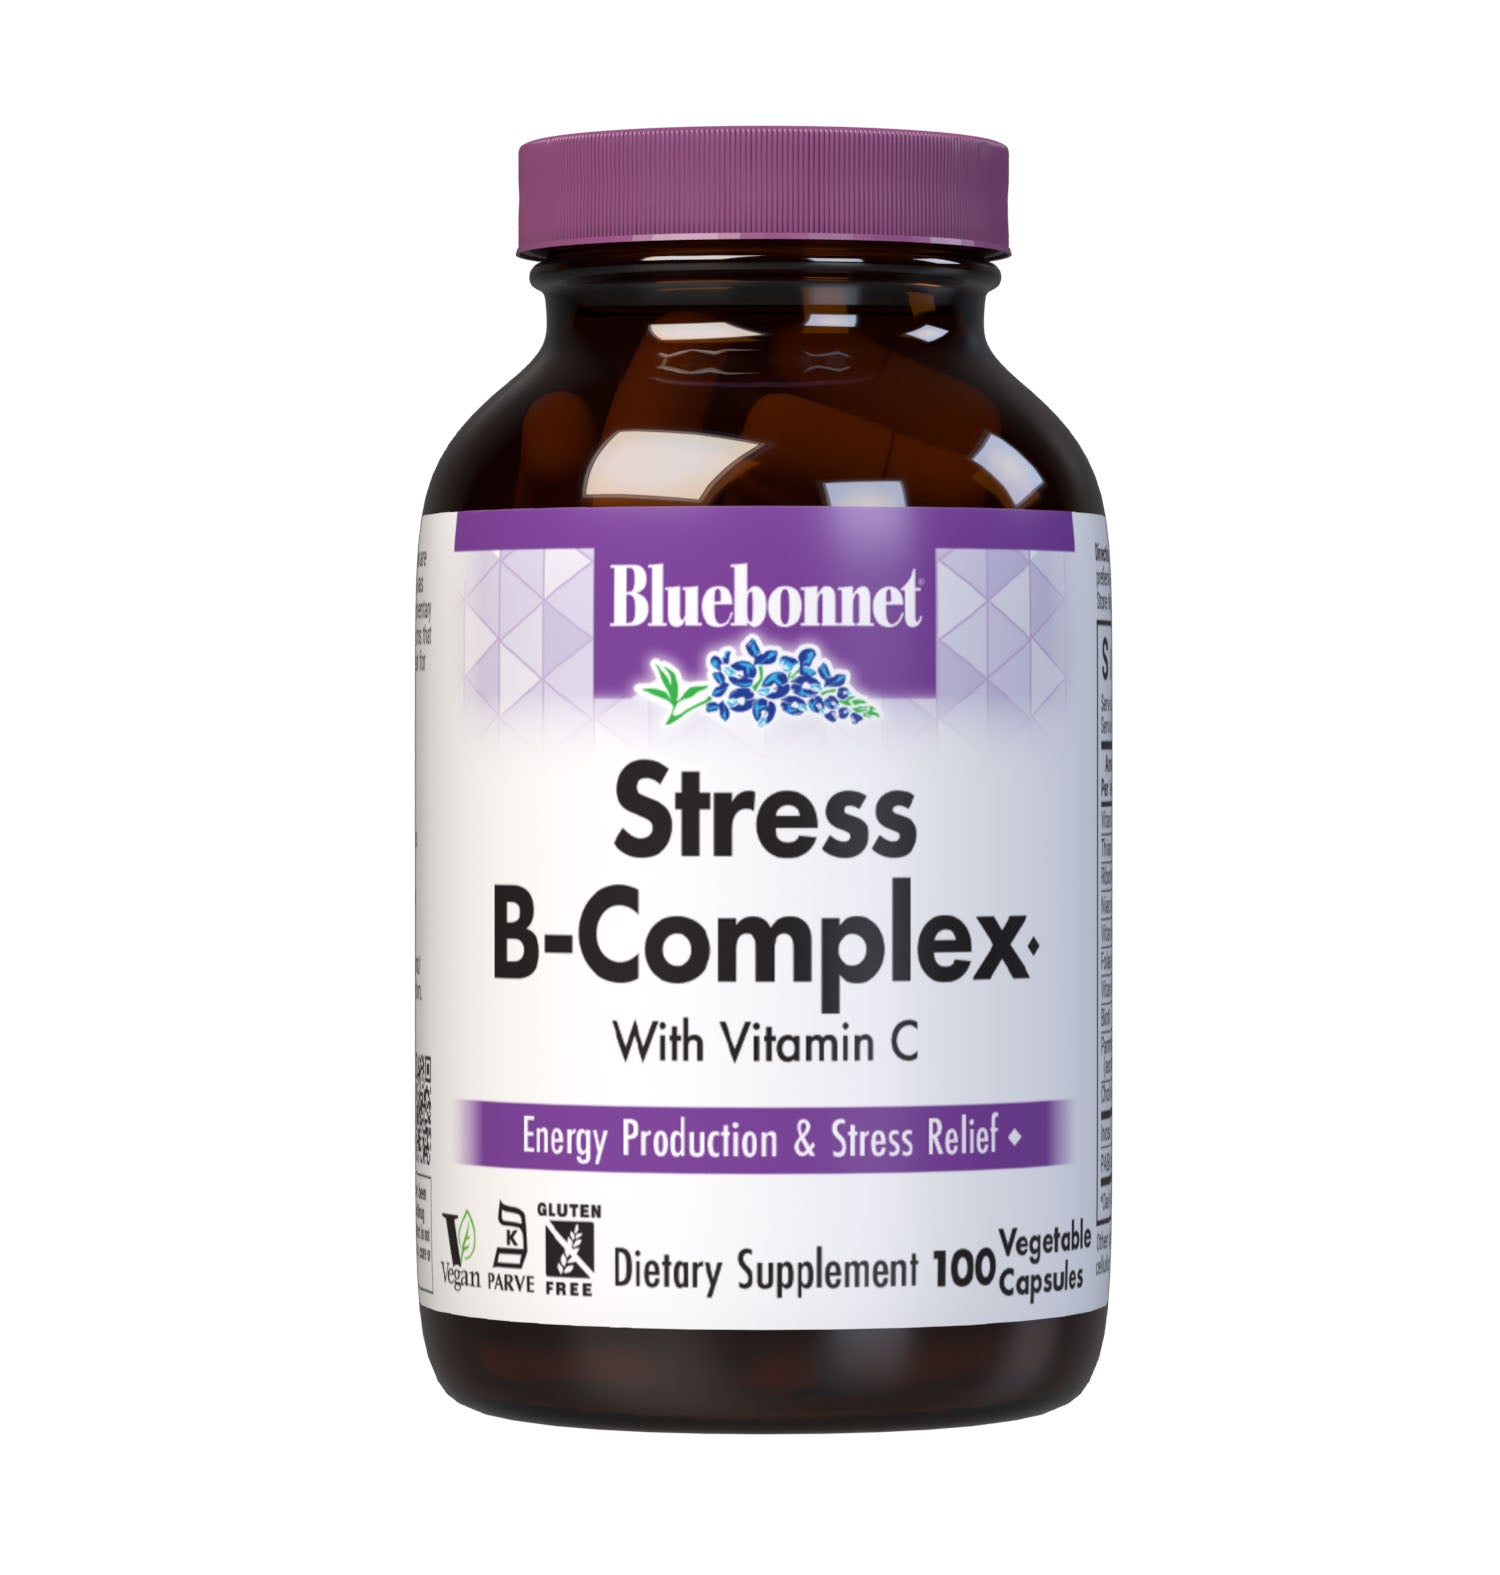 Bluebonnet’s Stress B-Complex Vegetable Capsules are formulated with a full spectrum of high potency B vitamins as well as vitamin C from L-ascorbic acid which play a complementary role in maintaining physiologic and metabolic functions that support energy production and nervous system health.  #size_100 count